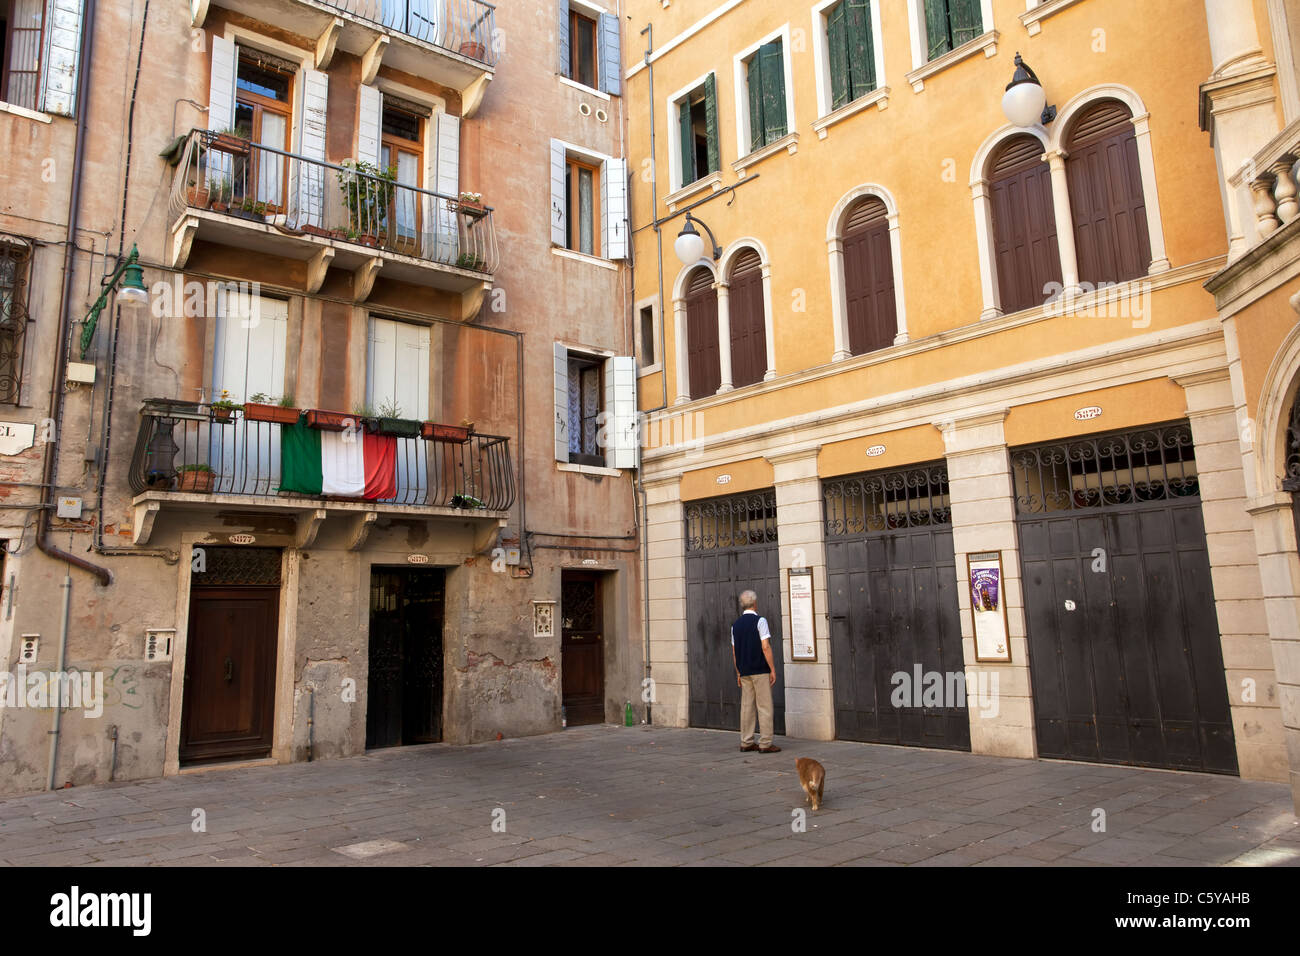 A man entering his house in Venice, Italy with his dog.  Shows ancient architecture of the buildings. Stock Photo